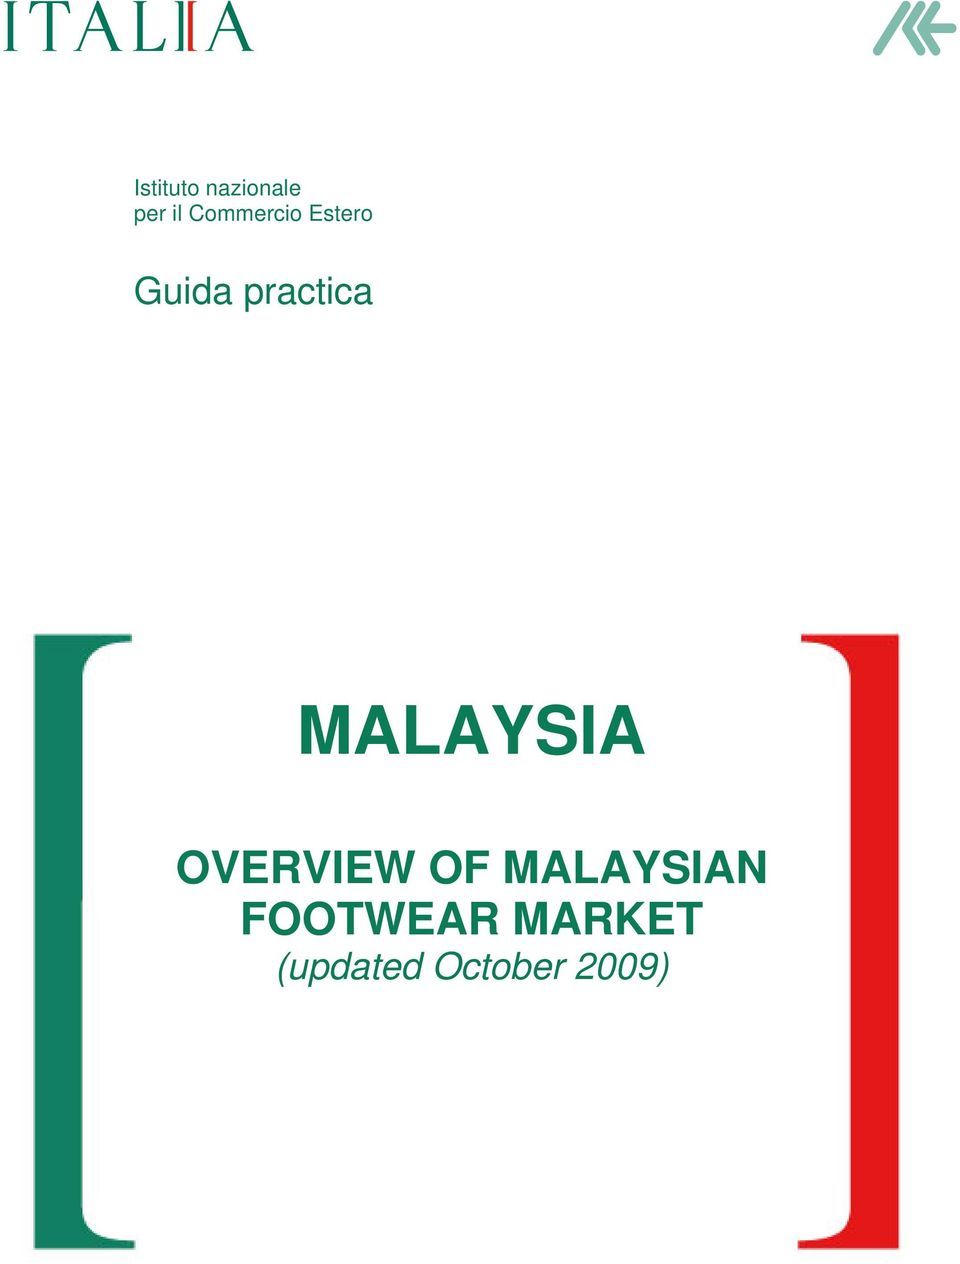 MALAYSIA OVERVIEW OF MALAYSIAN